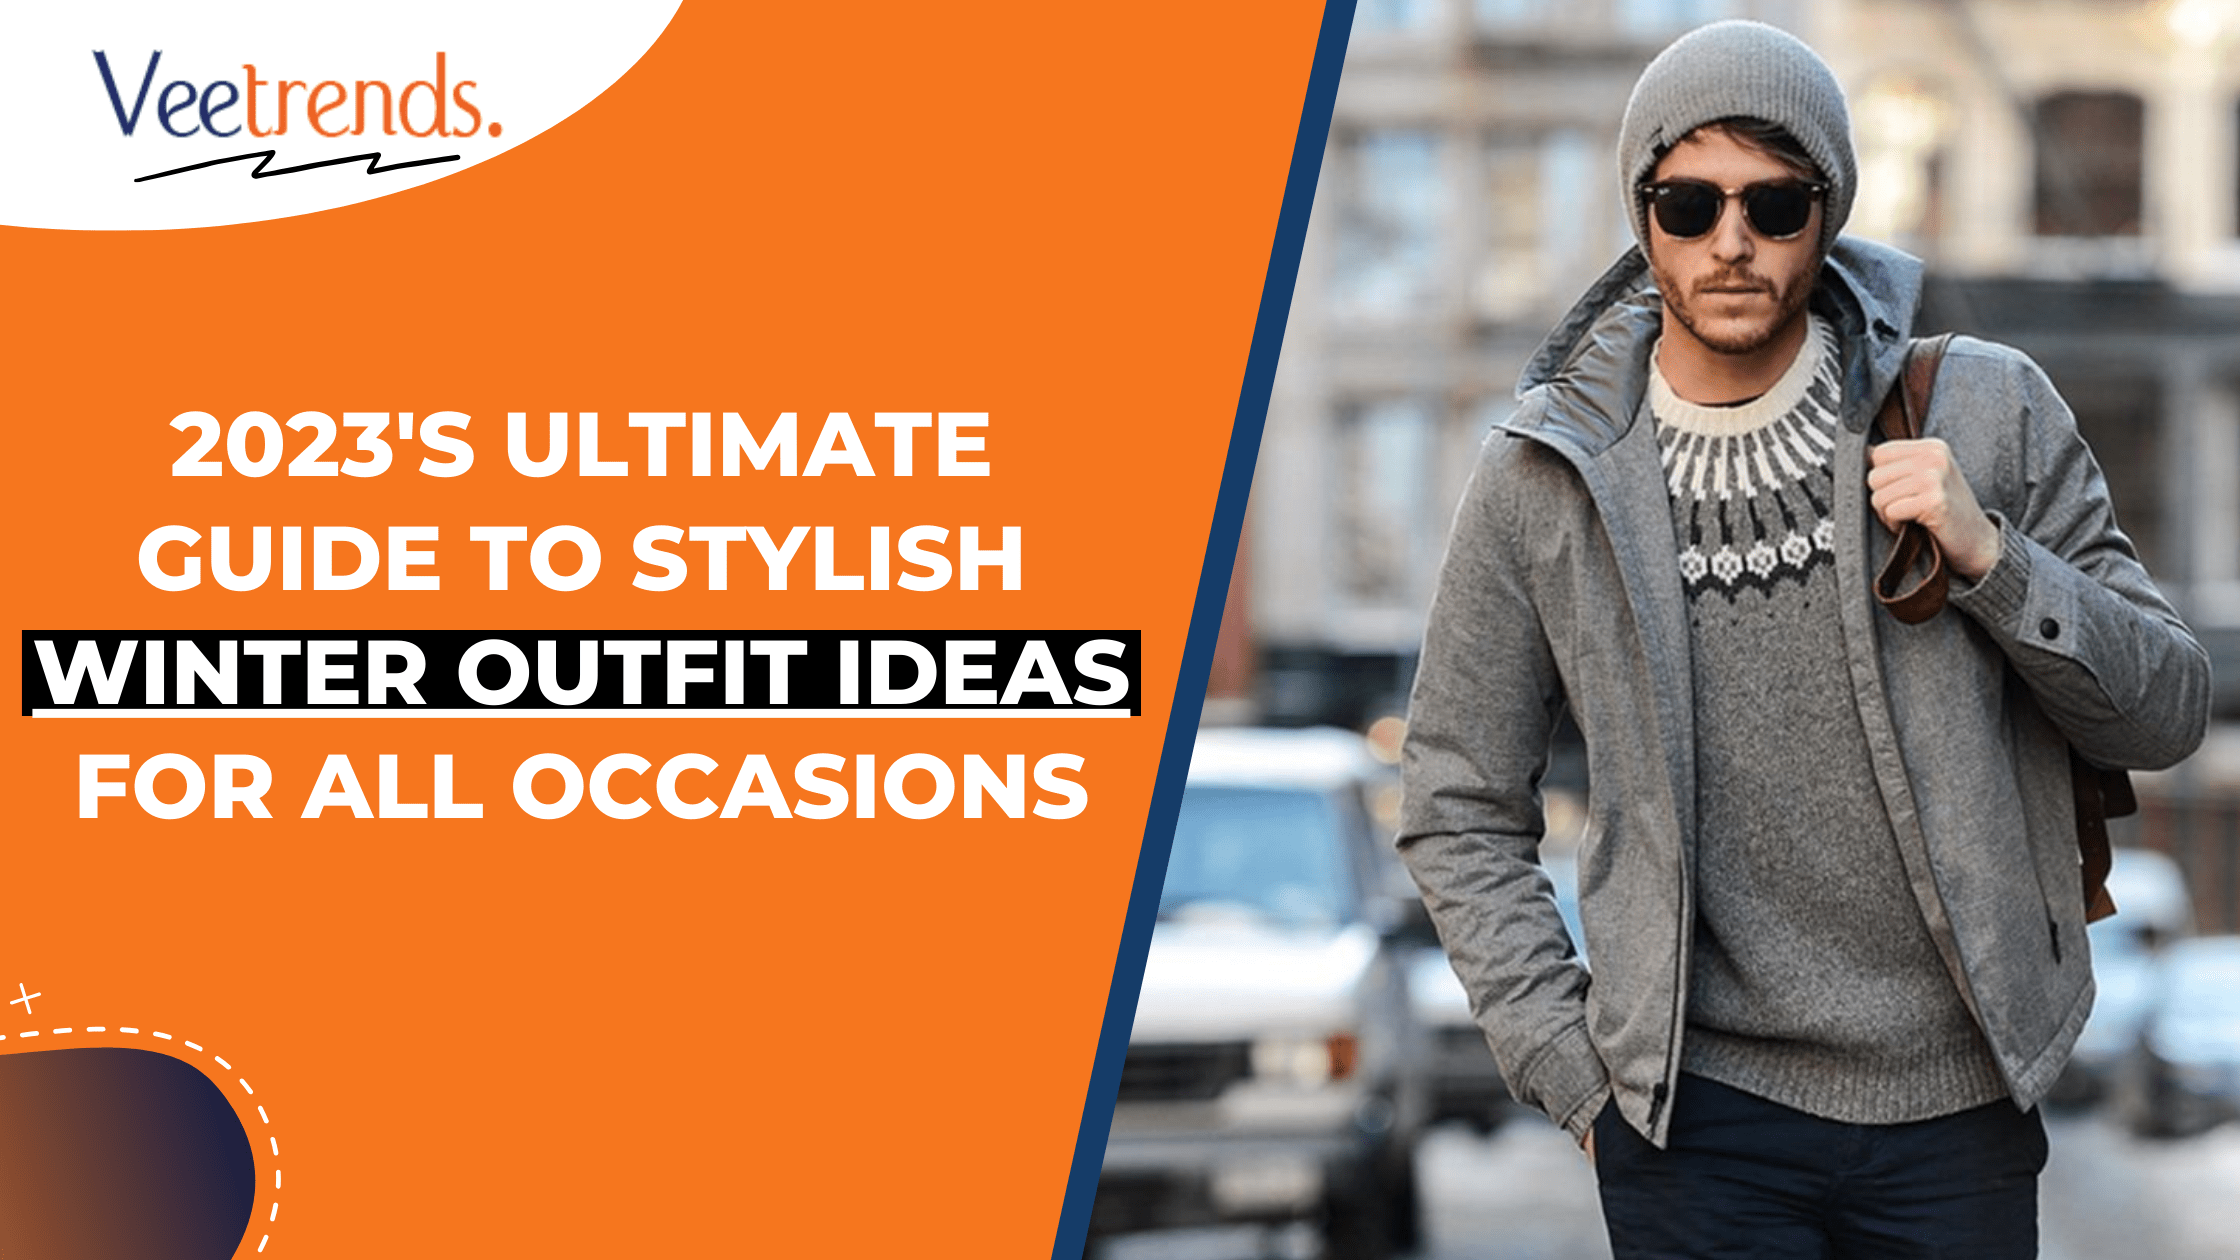 2023 Men's Winter Fashion Guide: How To Dress Your BEST In Cold Weather